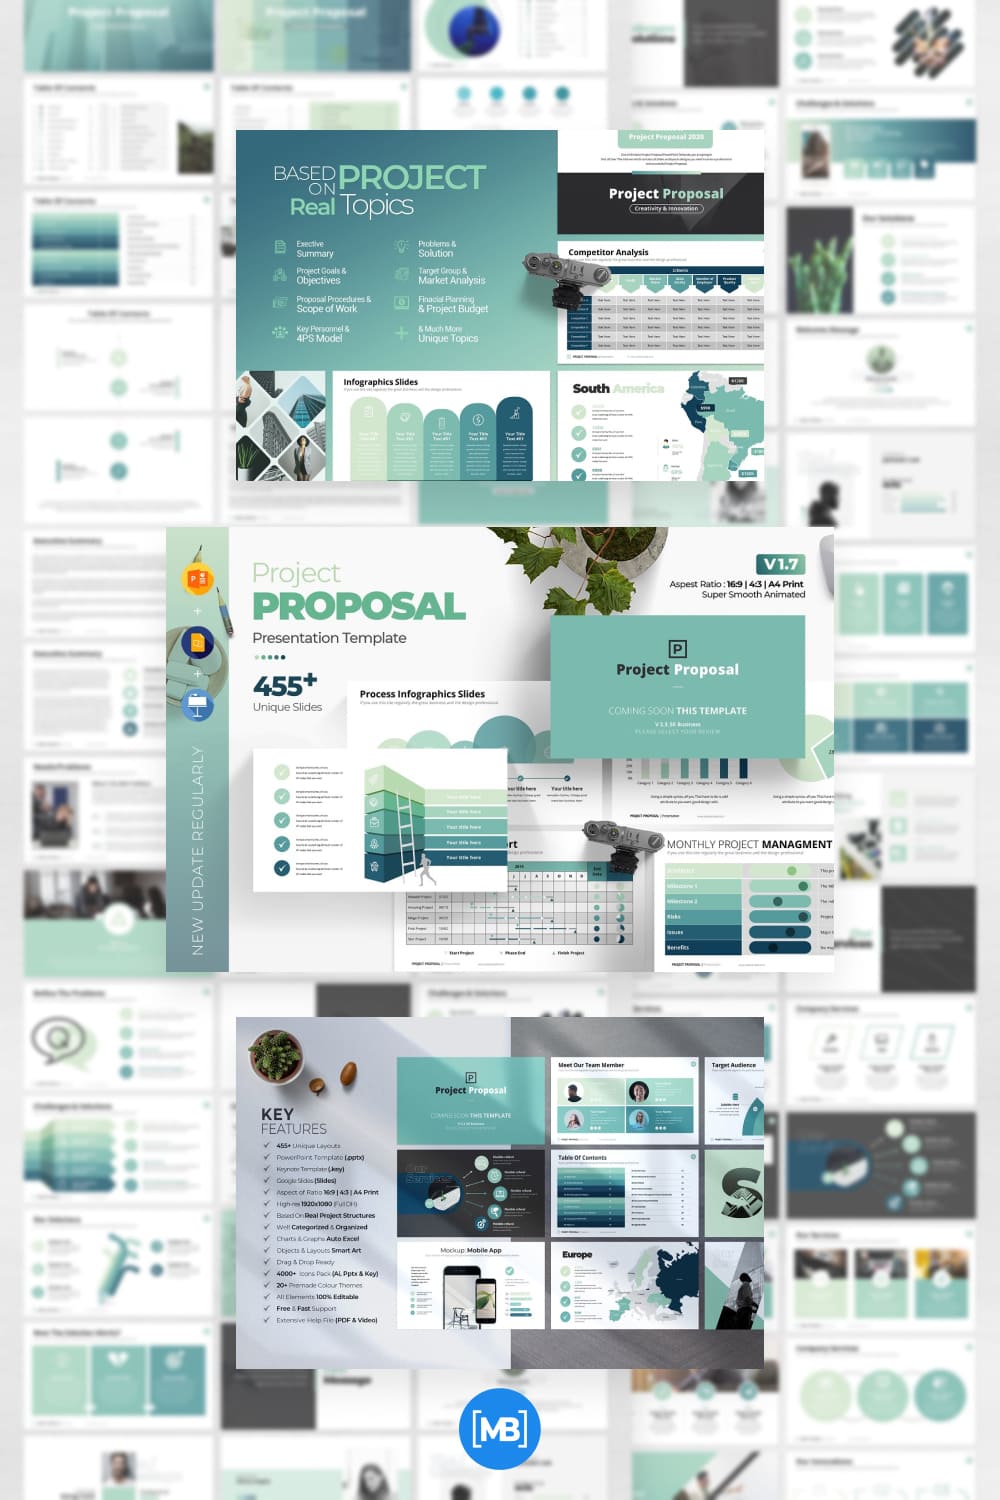 Project proposal powerpoint template.